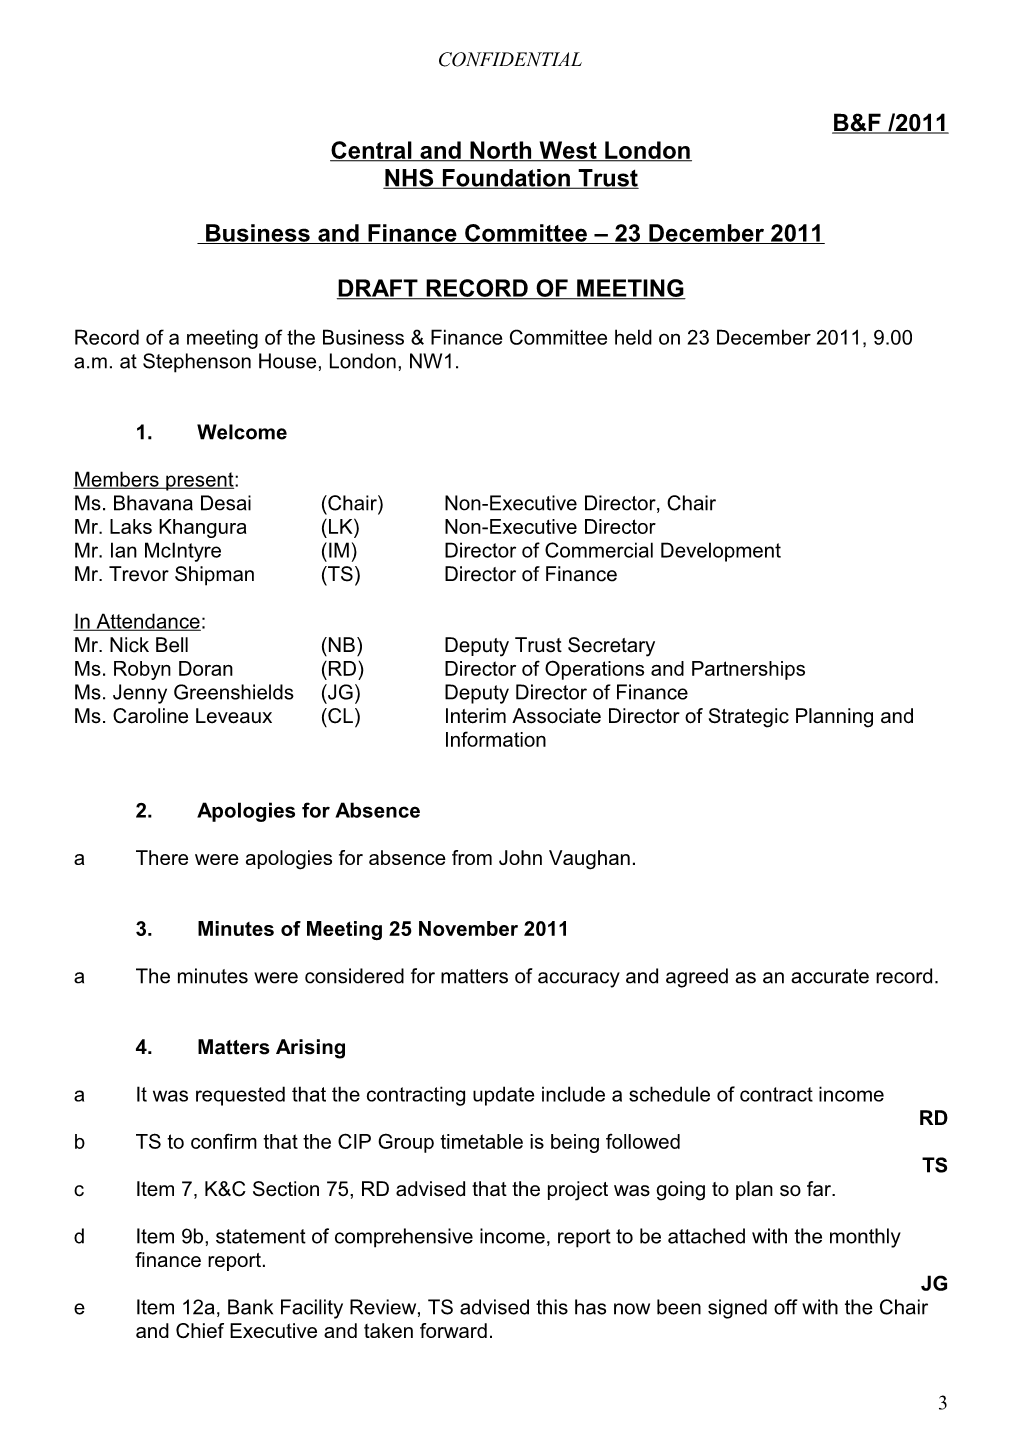 Report of the Business and Finance Committee to the Board of Directors